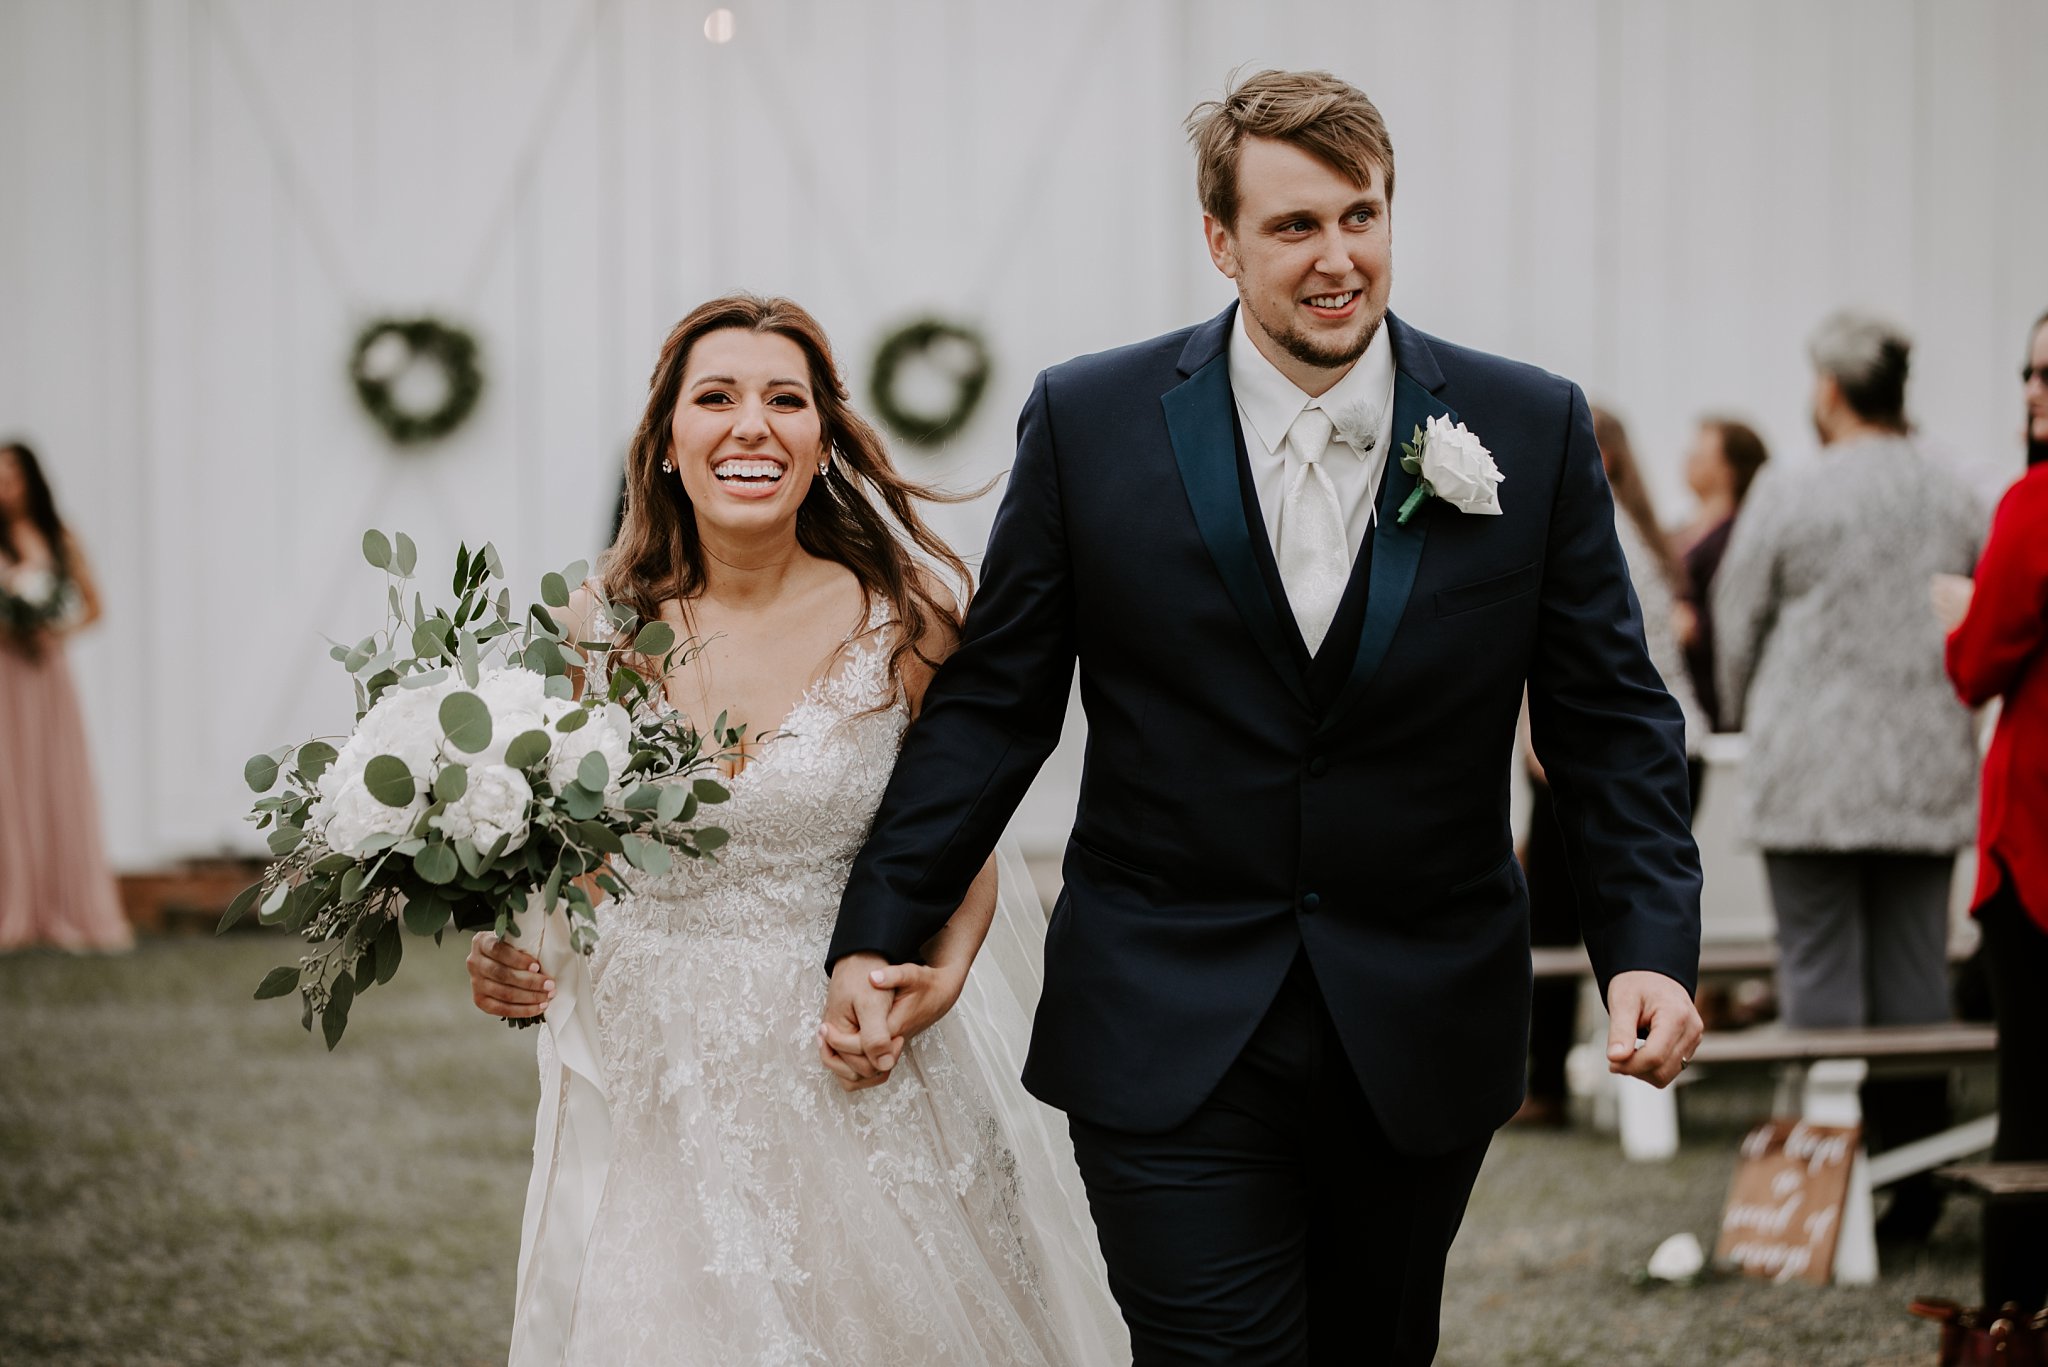 bride and groom can't stop smiling as they walk up the aisle after their wedding ceremony at Rosie Creek Farms